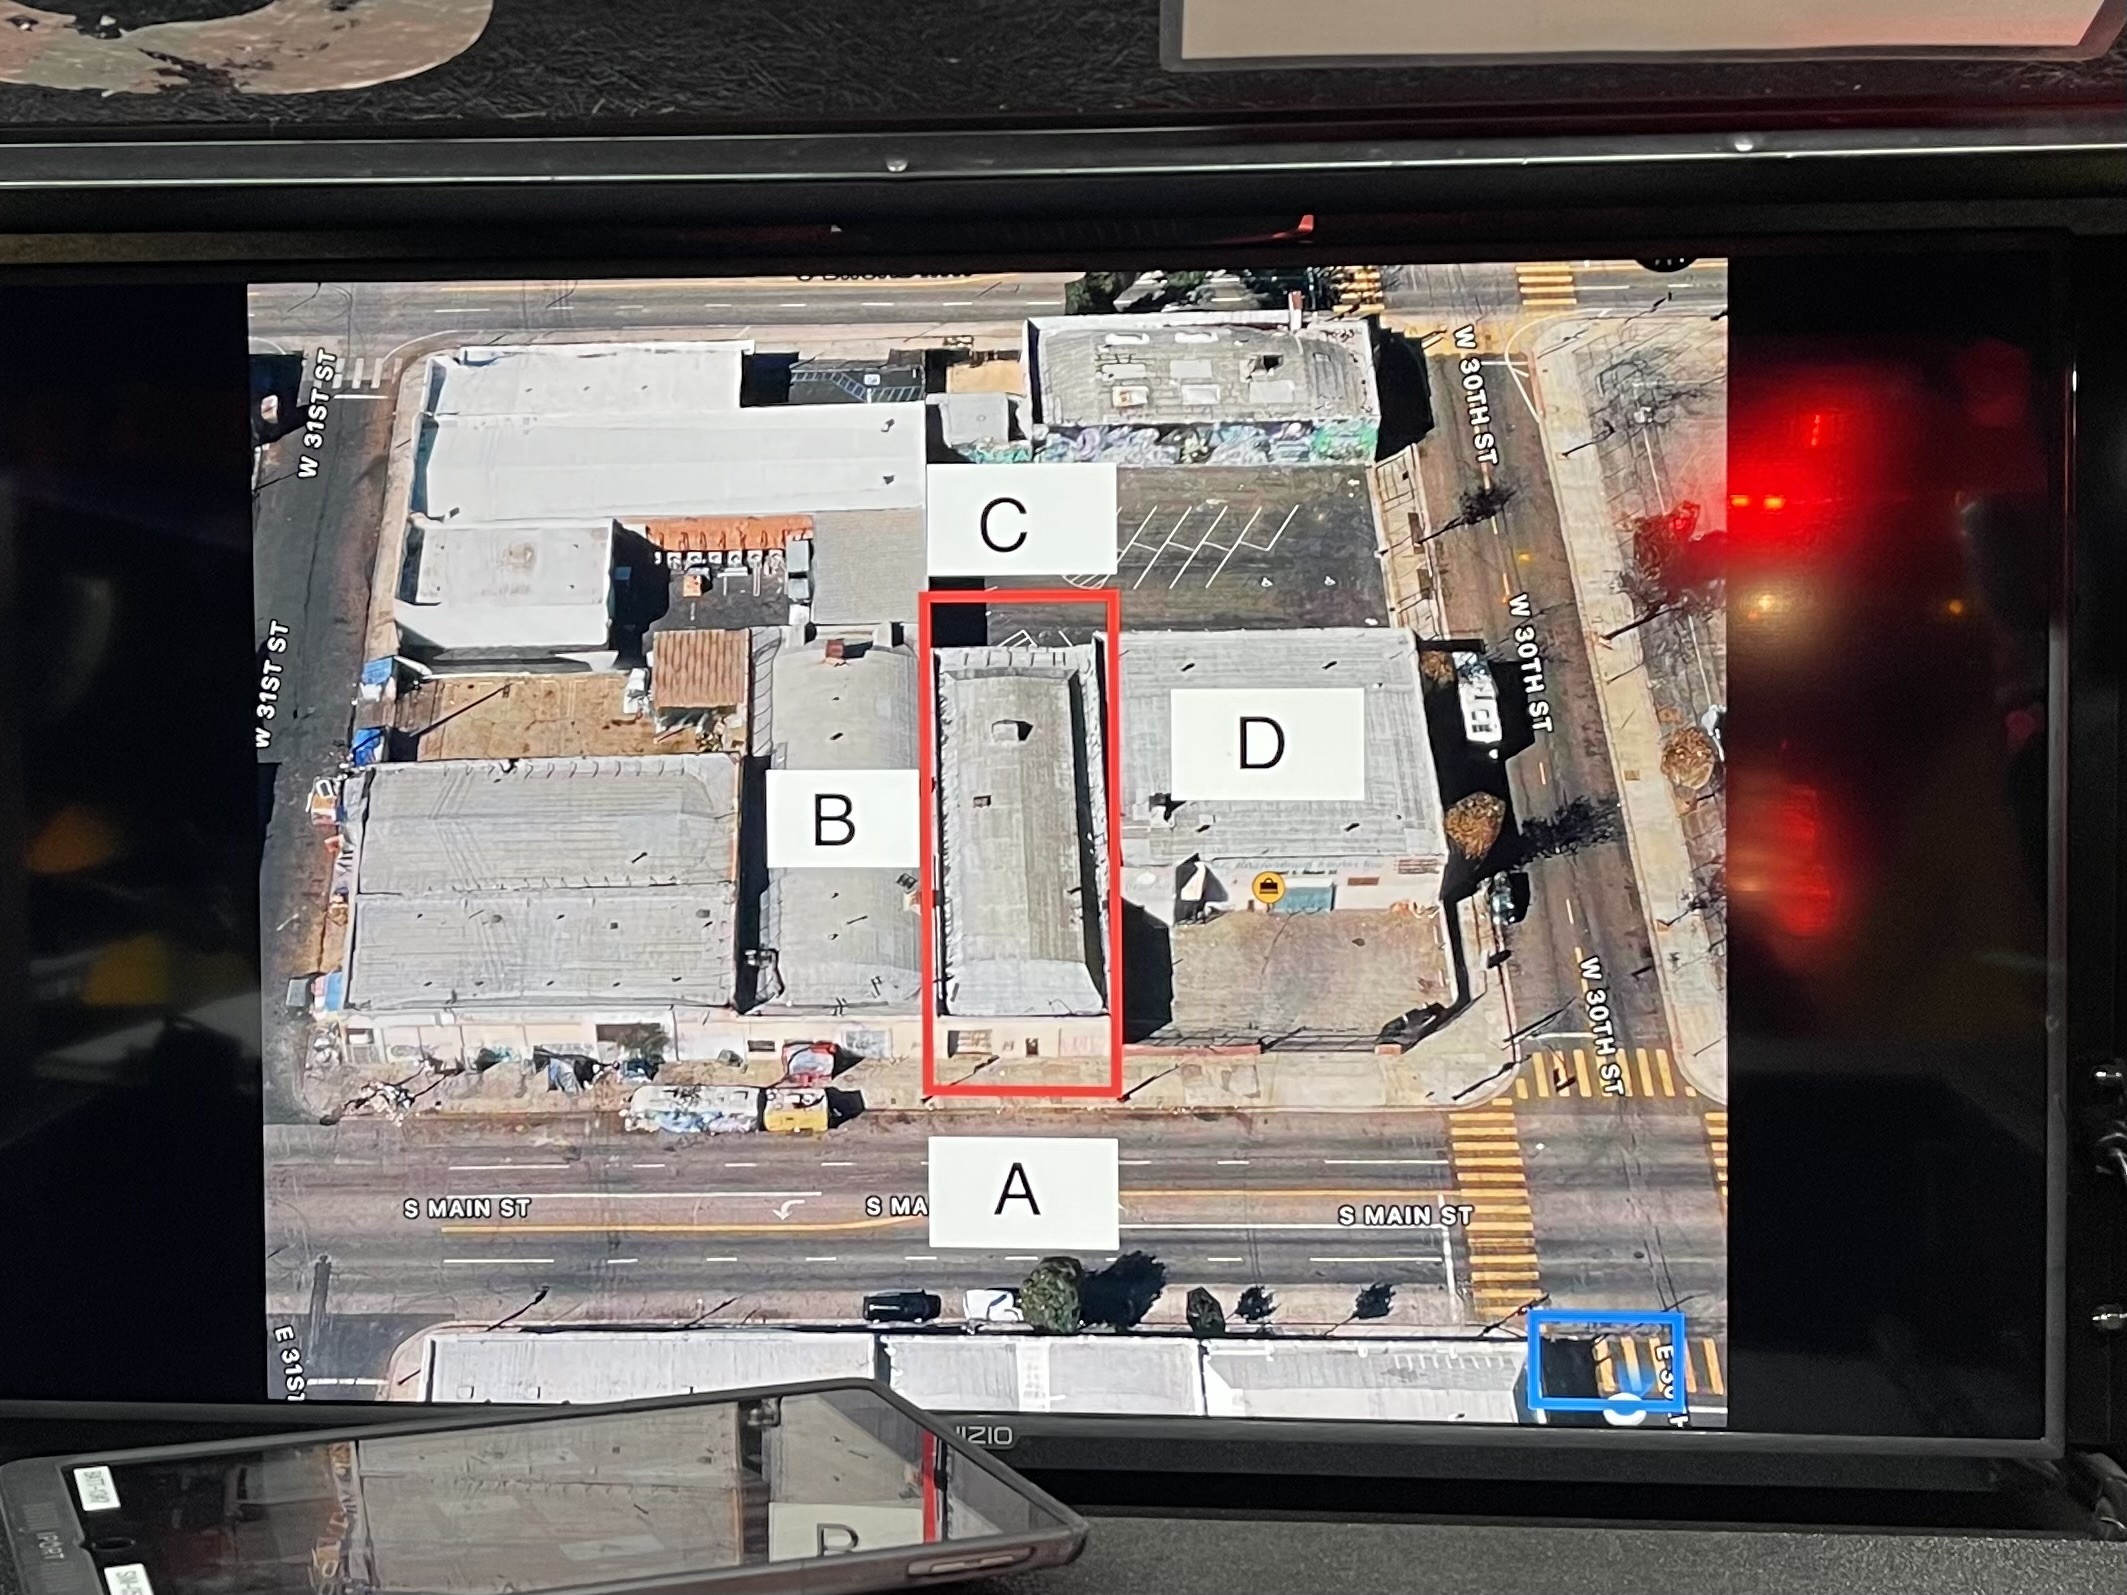 Google image labeling the buildings involved in the incident